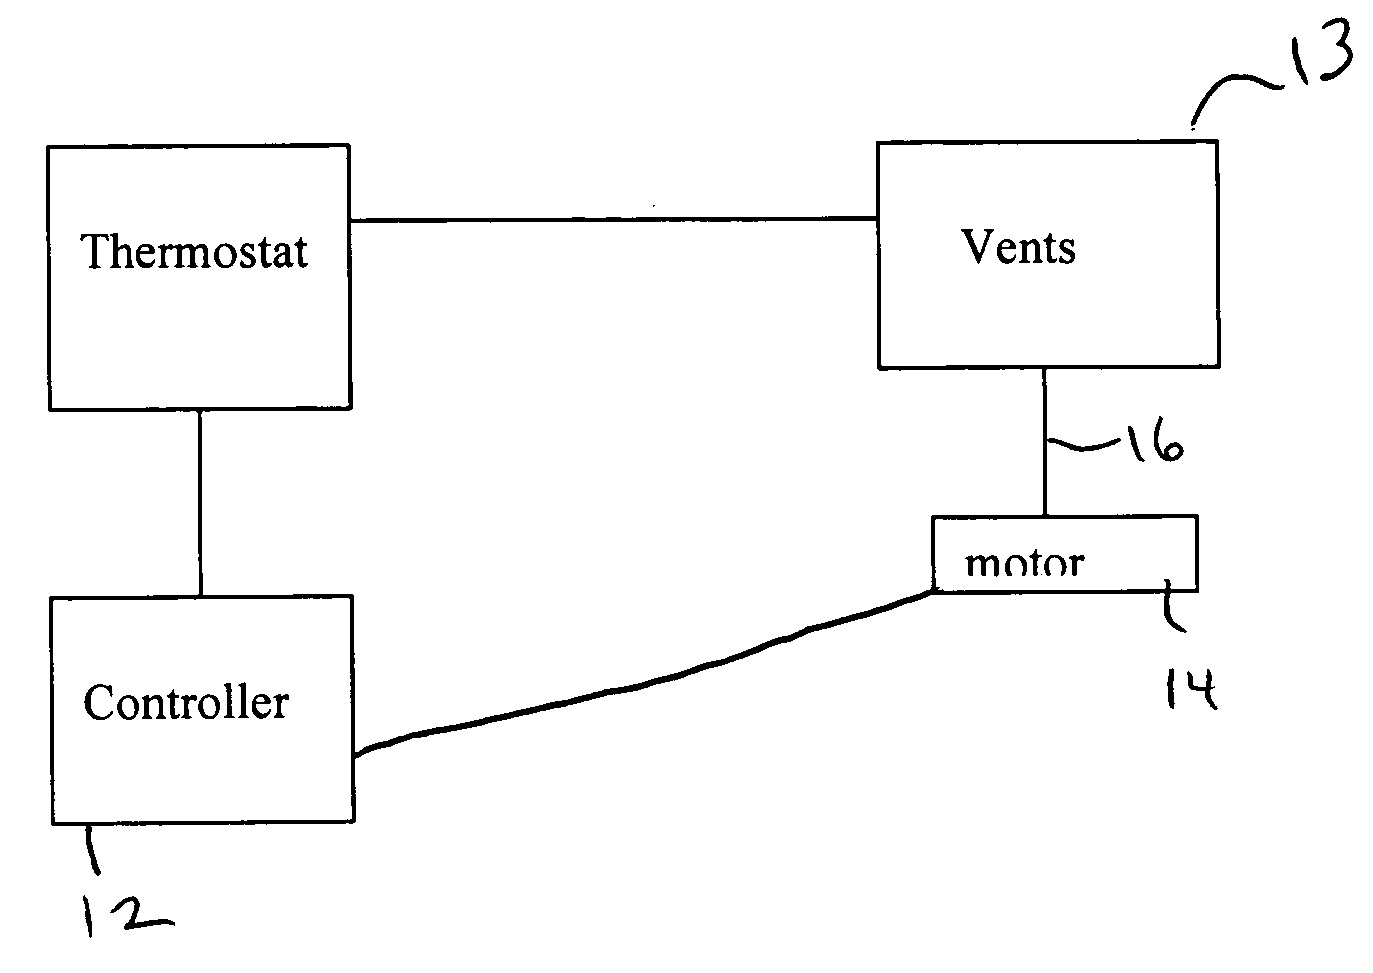 System for controlling a ventilation system